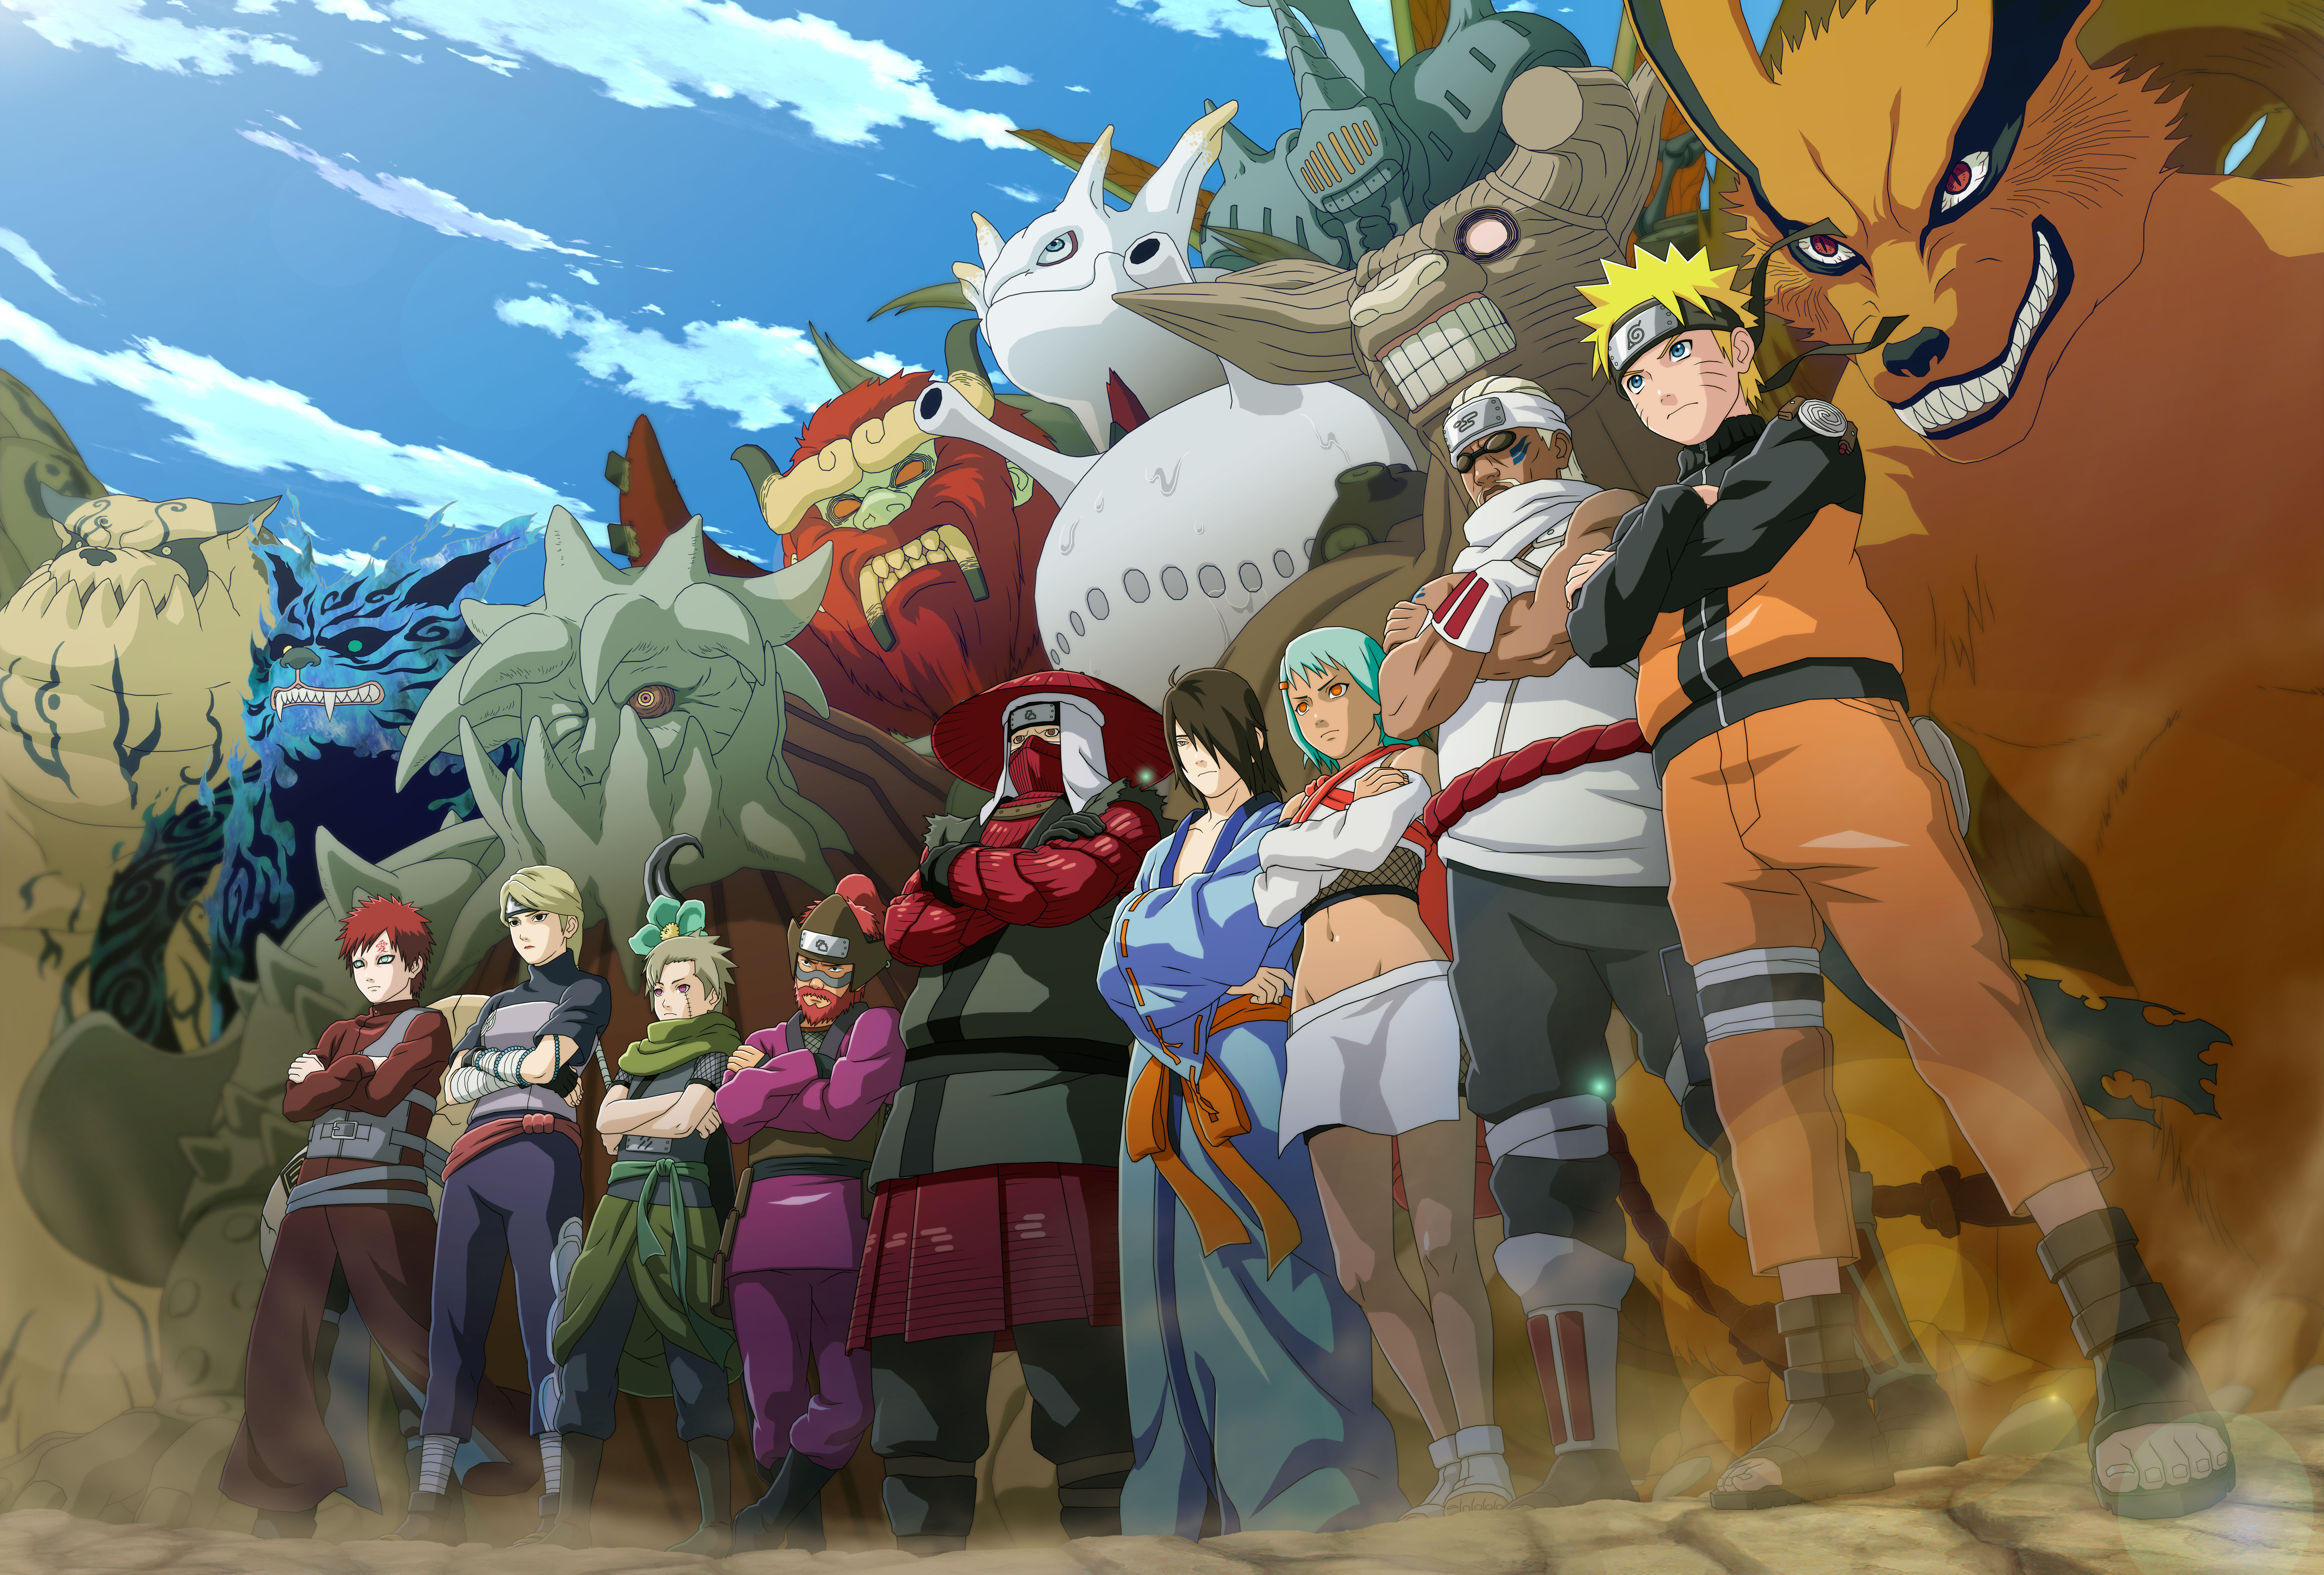 NARUTO ONLINE MOBILE! Tencent Official Release! First